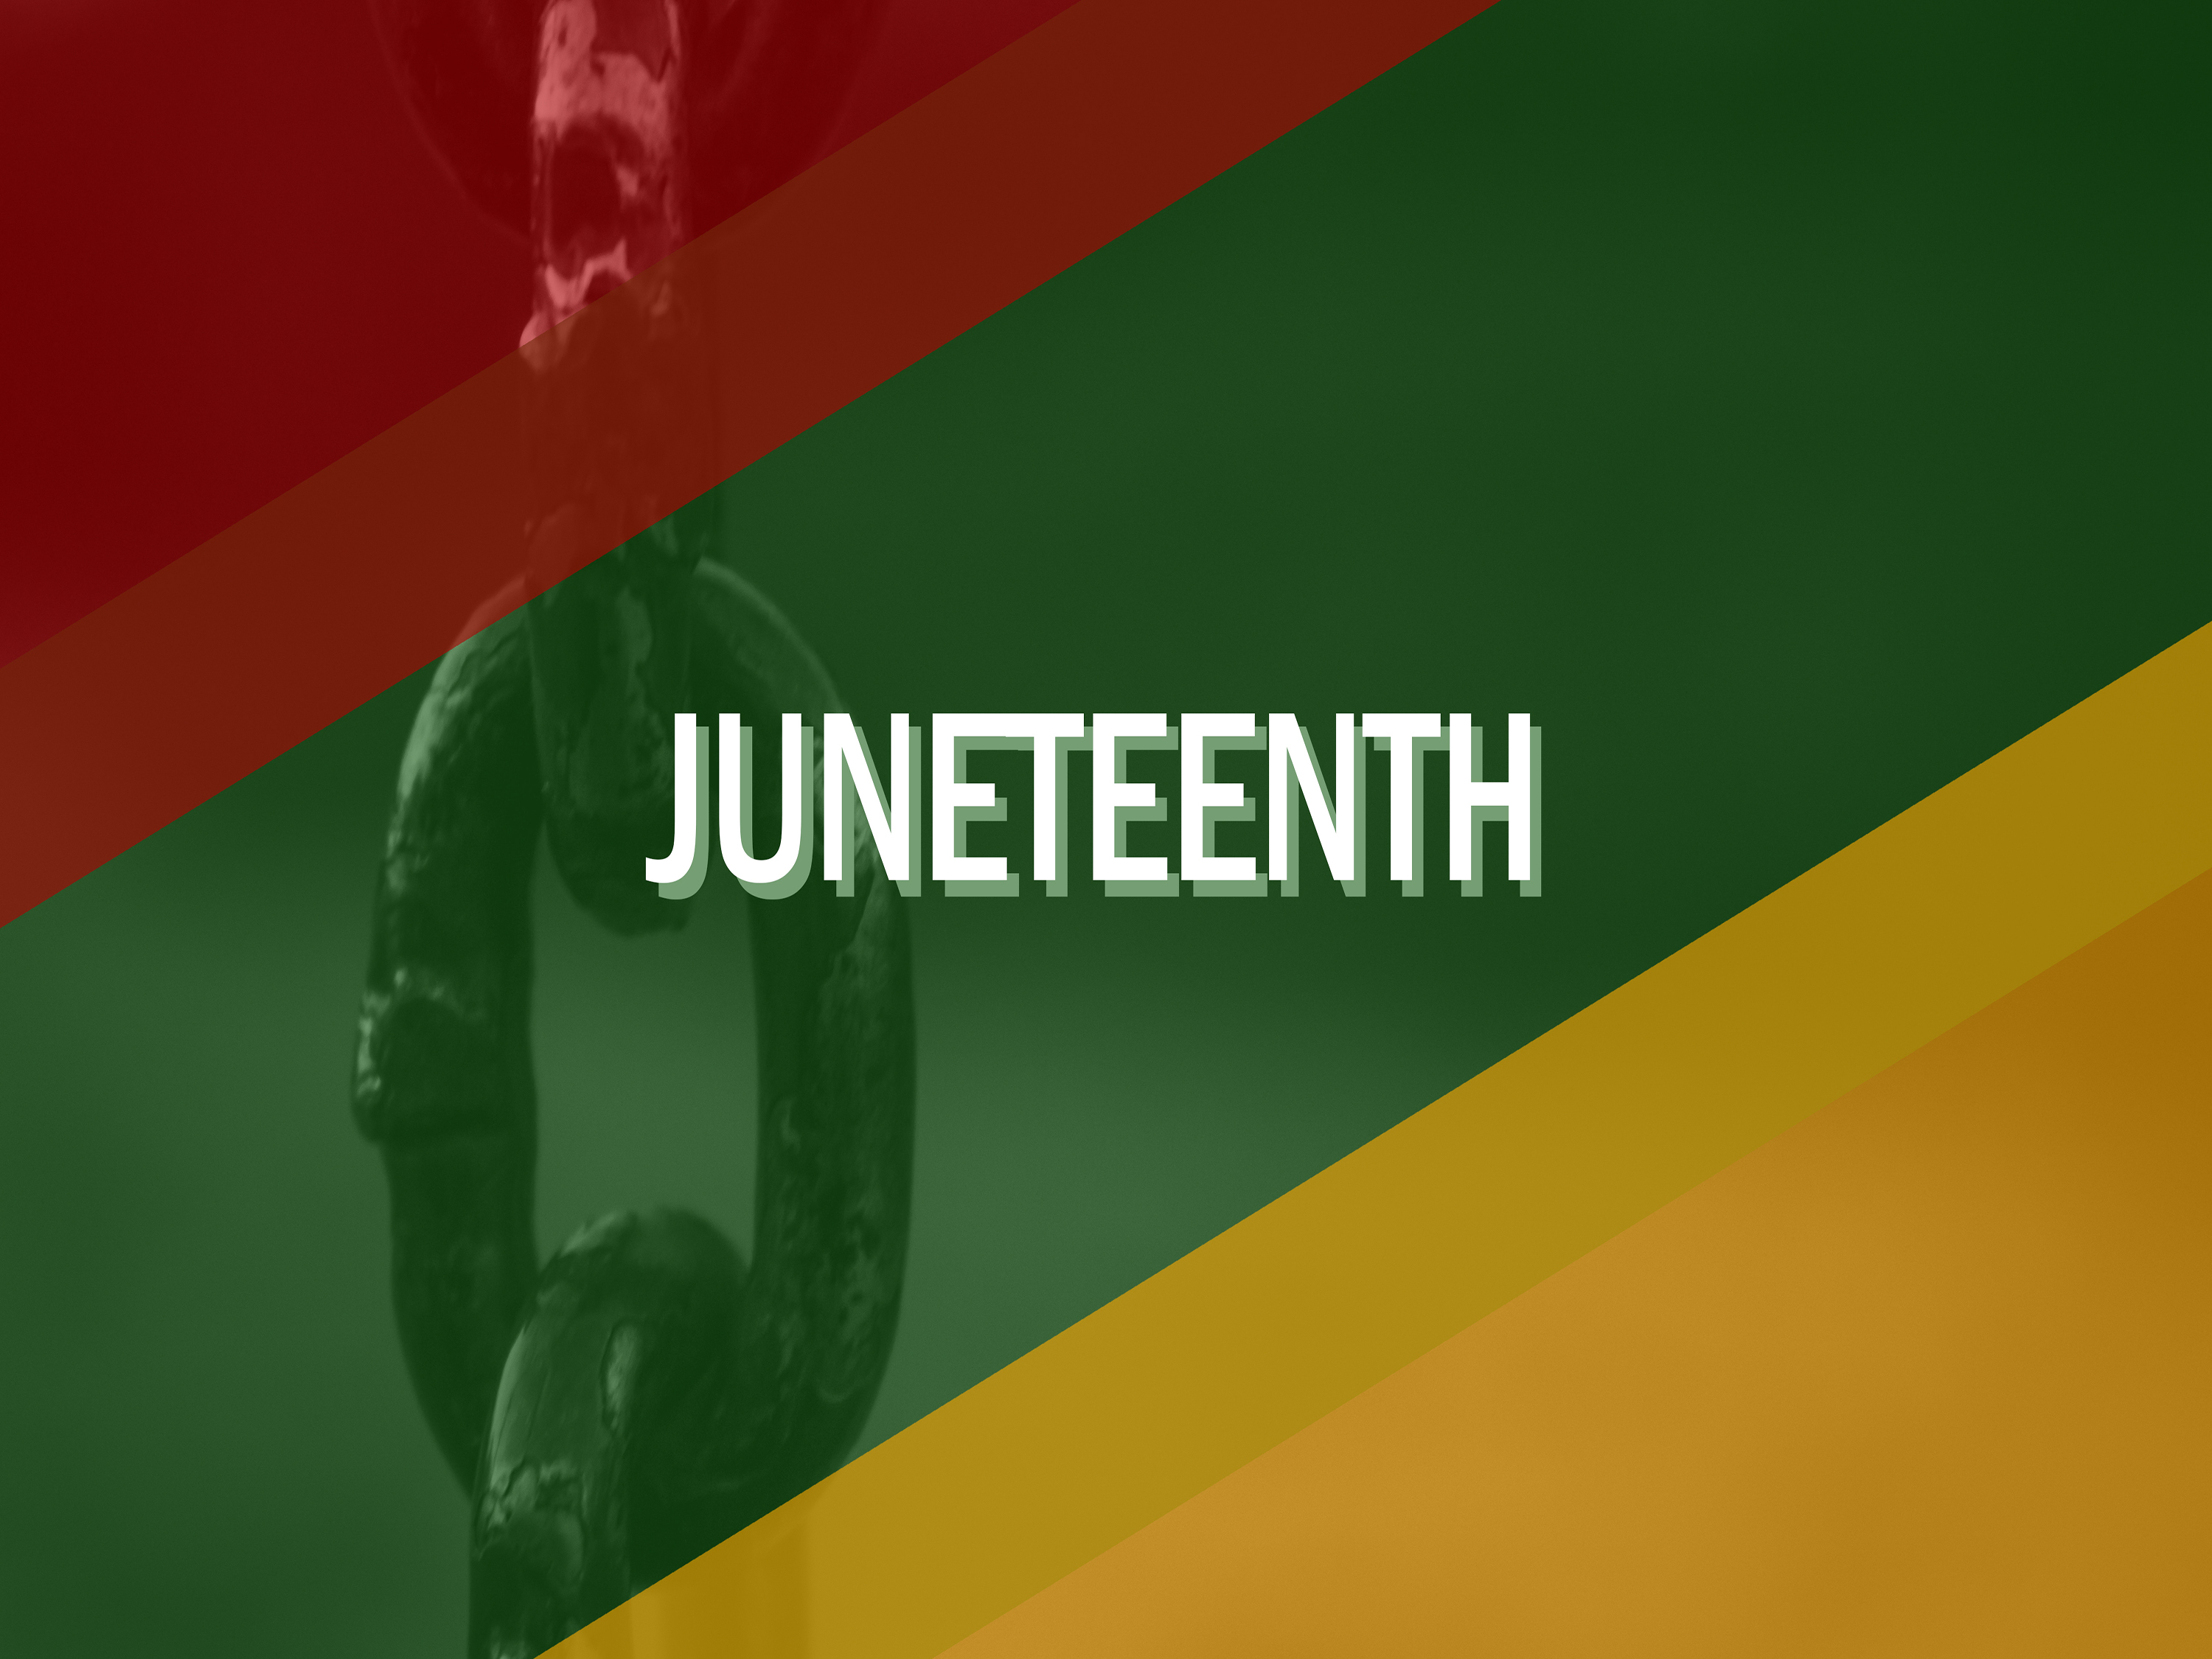 Juneteenth Graphic. Juneteenth (a combination of the words “June” and “nineteenth”) is the day that federal troops came to Galveston, Texas on June 19, 1865 and made sure that enslaved people in the area were set free. This was two-and-one-half years after Lincoln signed the Emancipation Proclamation. 